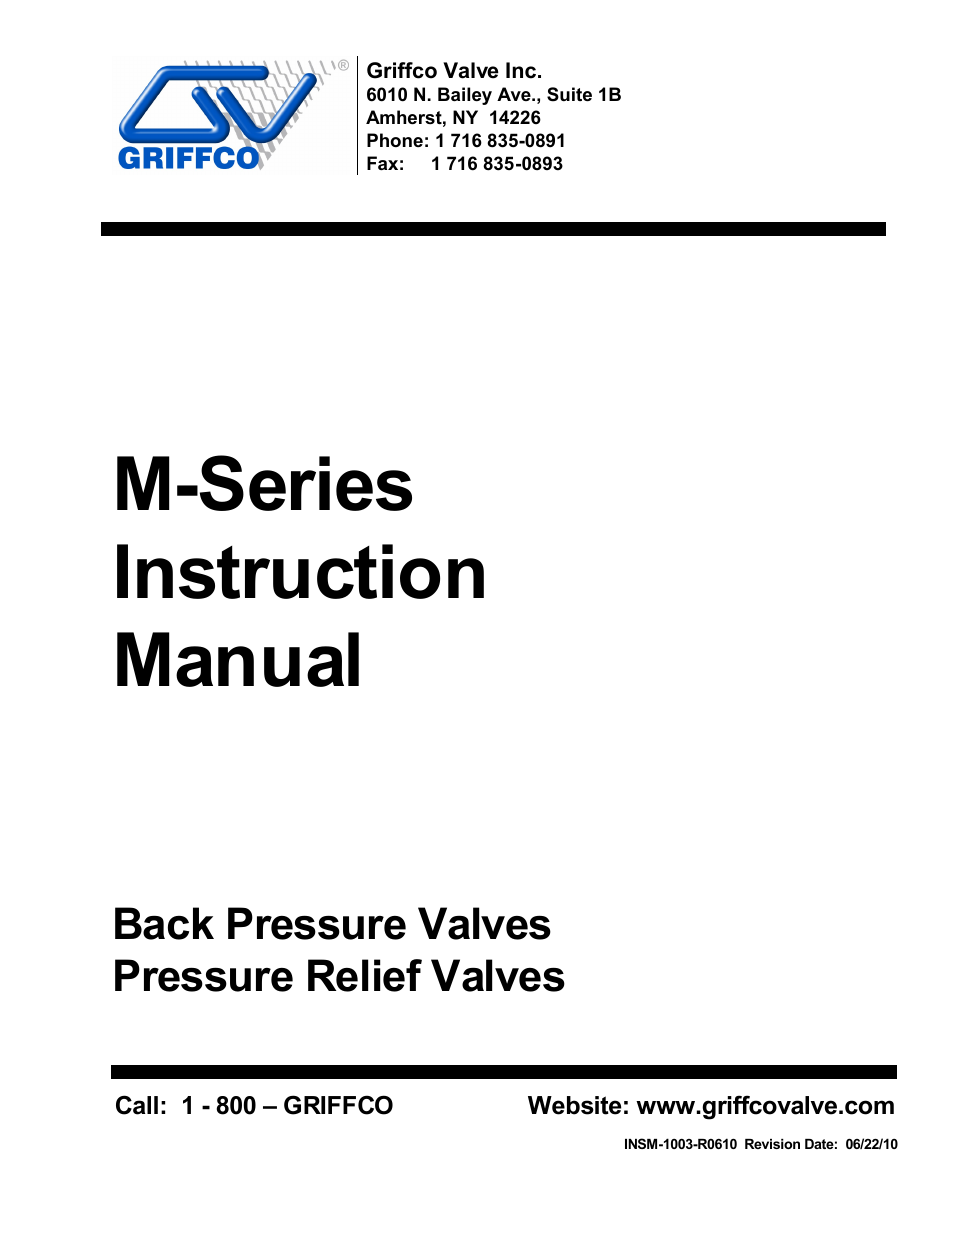 Griffco Valve M-Series User Manual | 4 pages